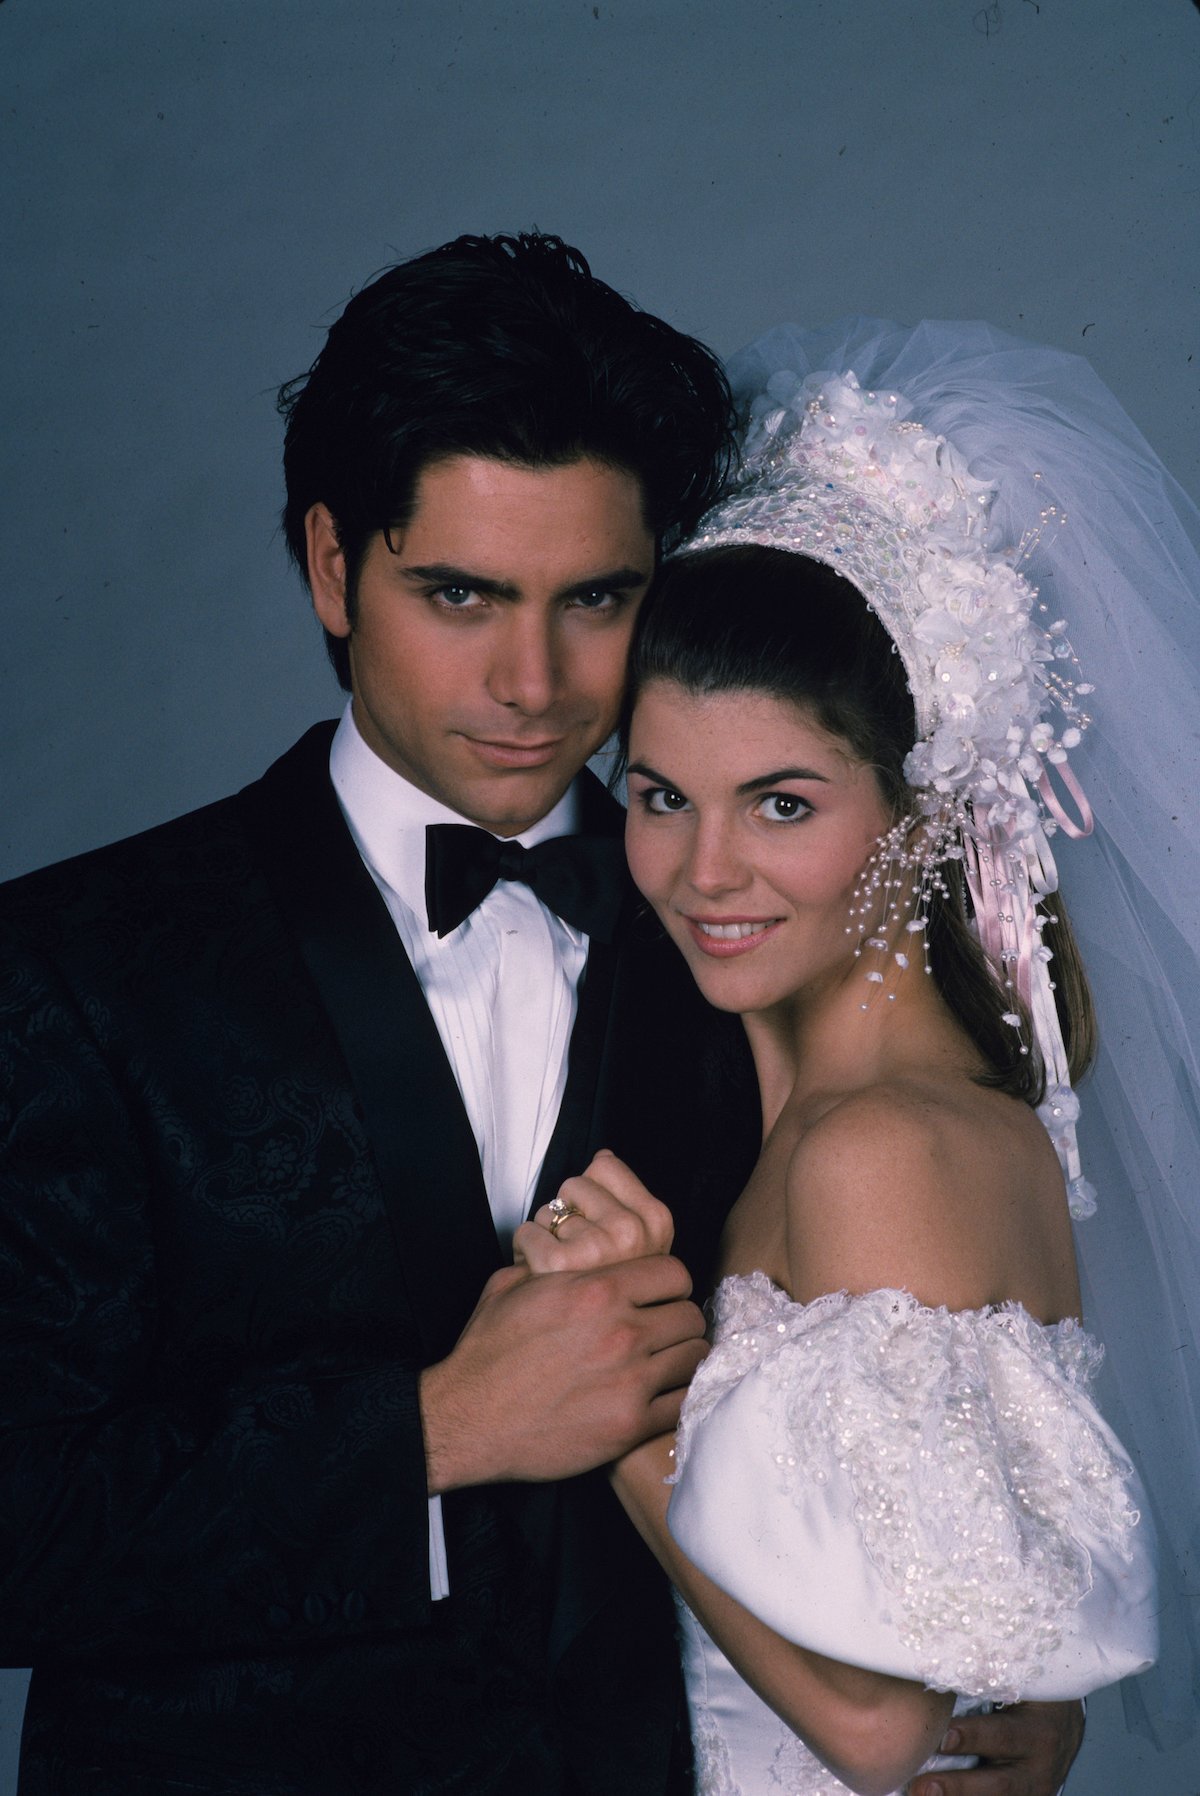 'The Wedding: Part II' Episode of 'Full House'